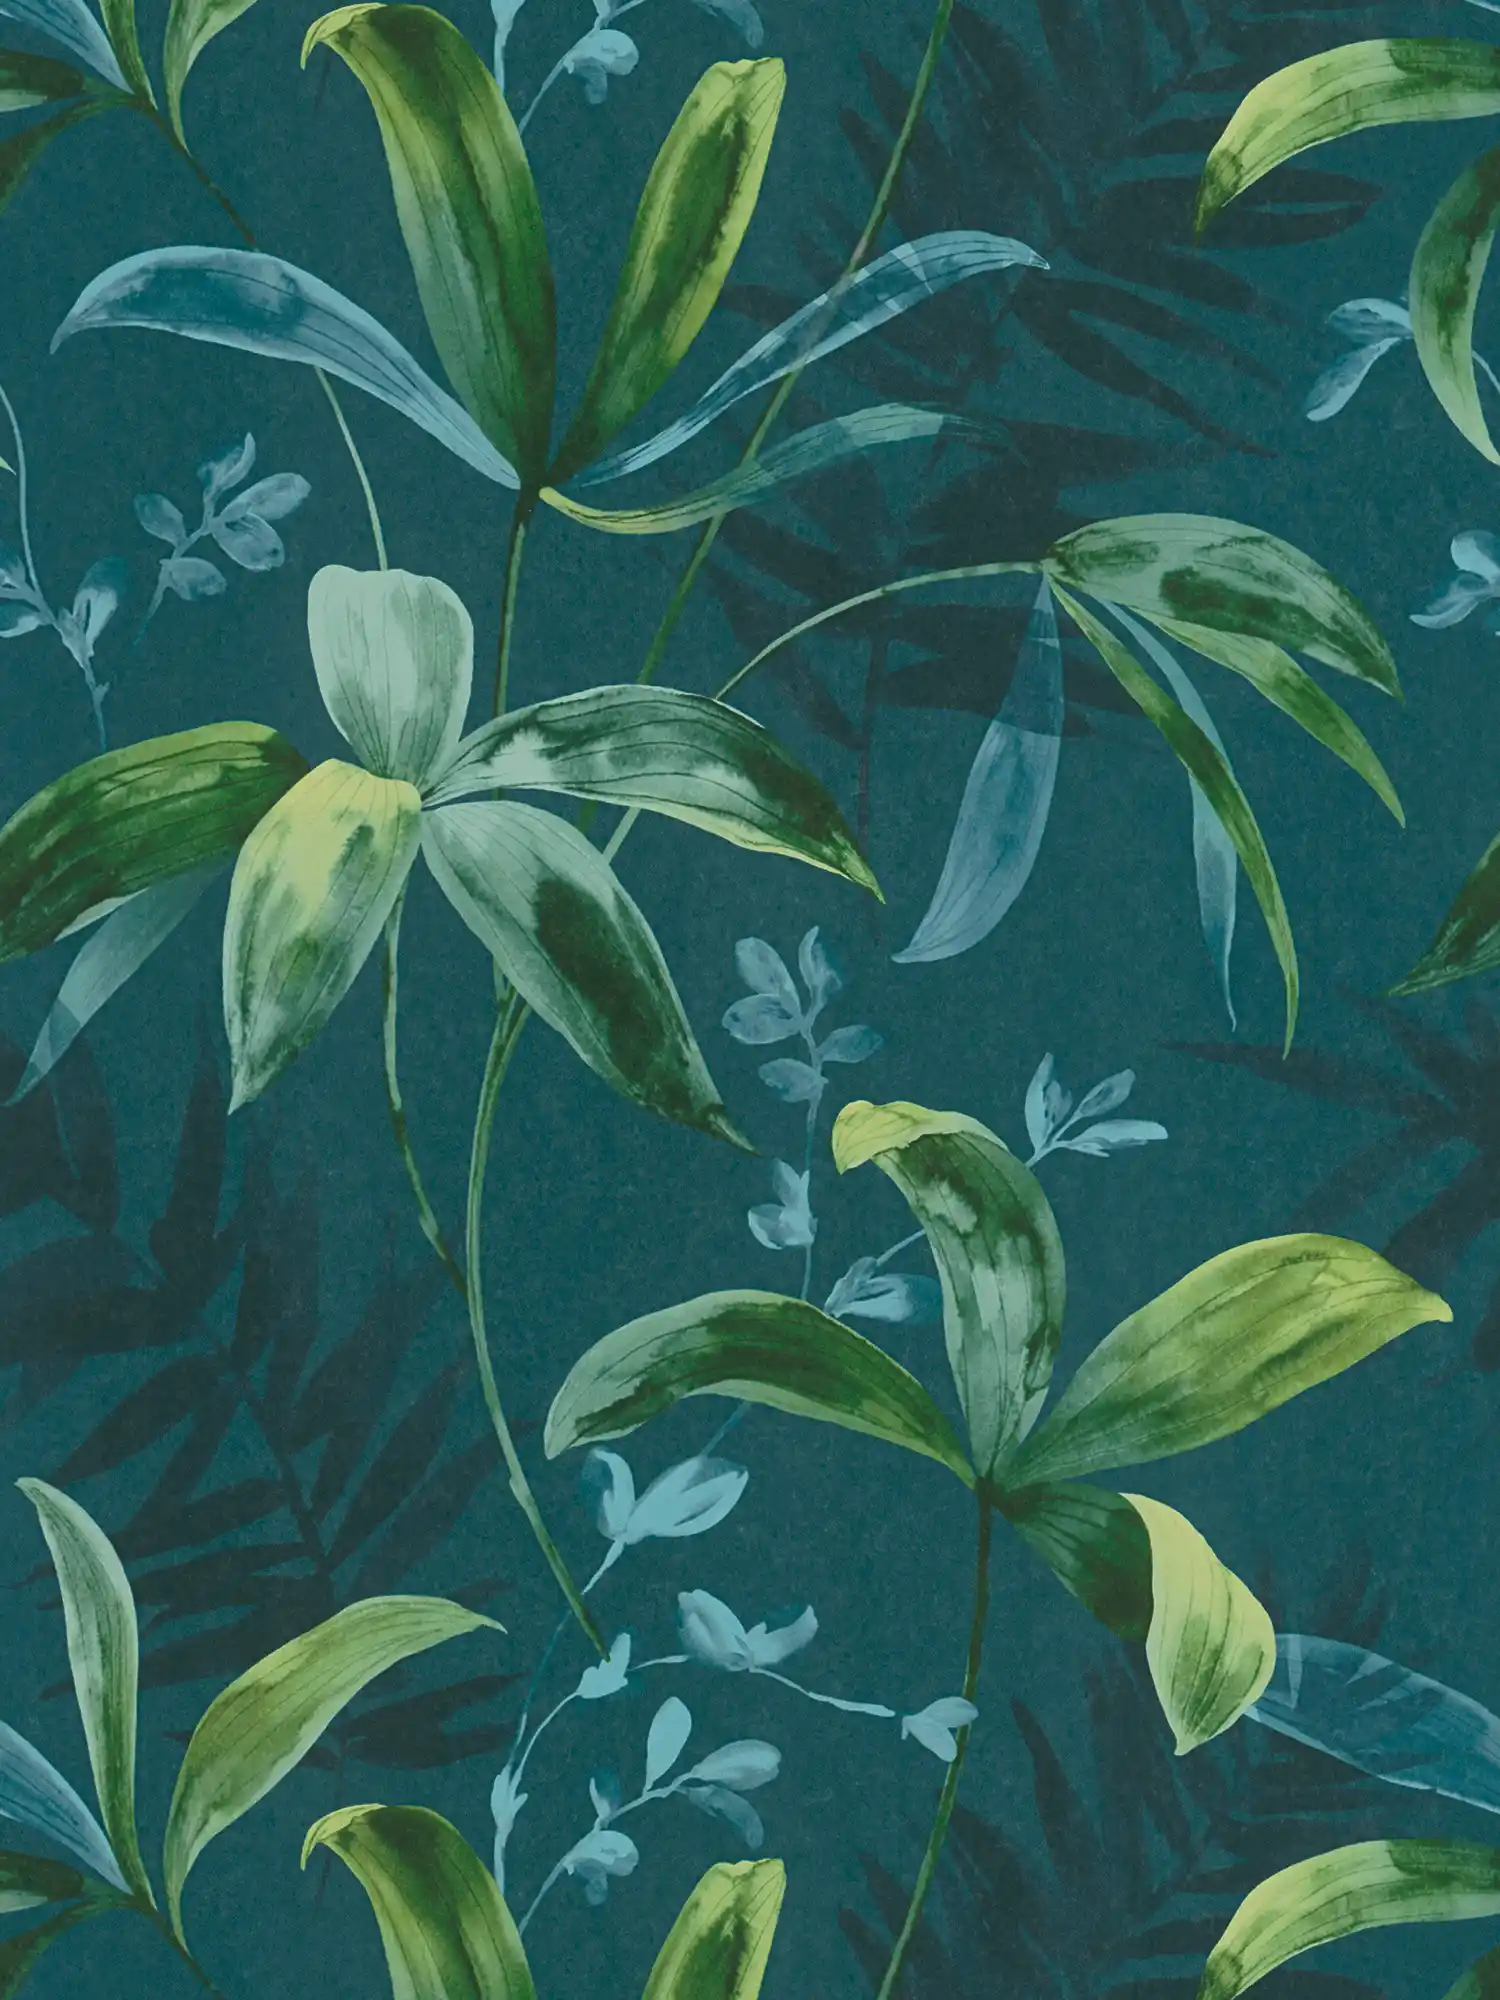 Dark green wallpaper with leaves pattern in watercolour style - blue, green
